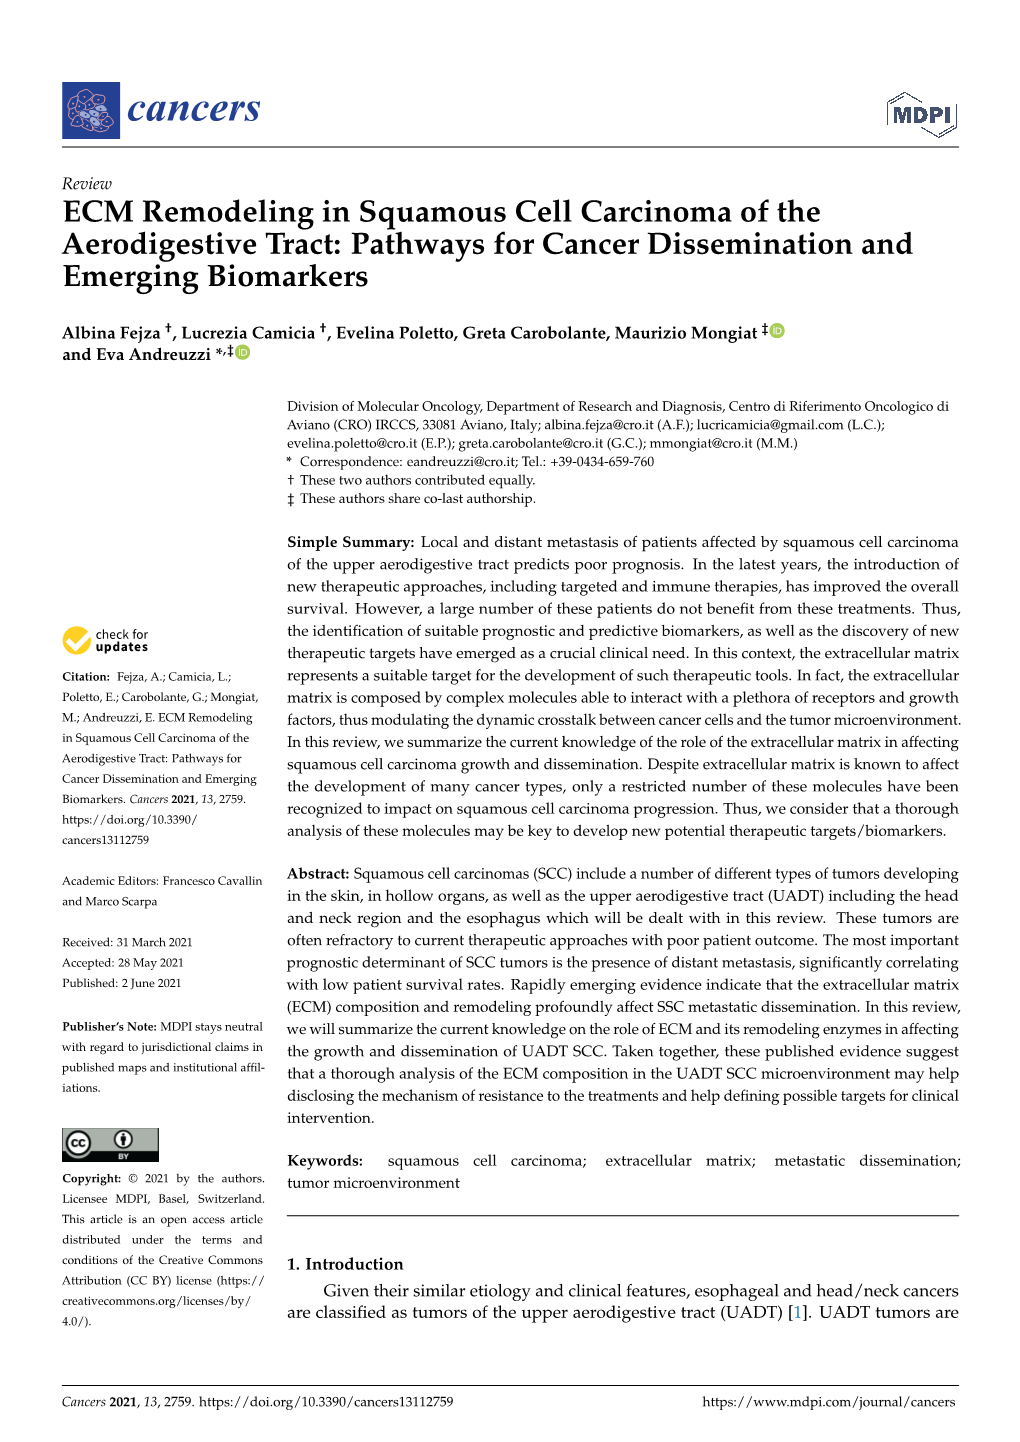 ECM Remodeling in Squamous Cell Carcinoma of the Aerodigestive Tract: Pathways for Cancer Dissemination and Emerging Biomarkers